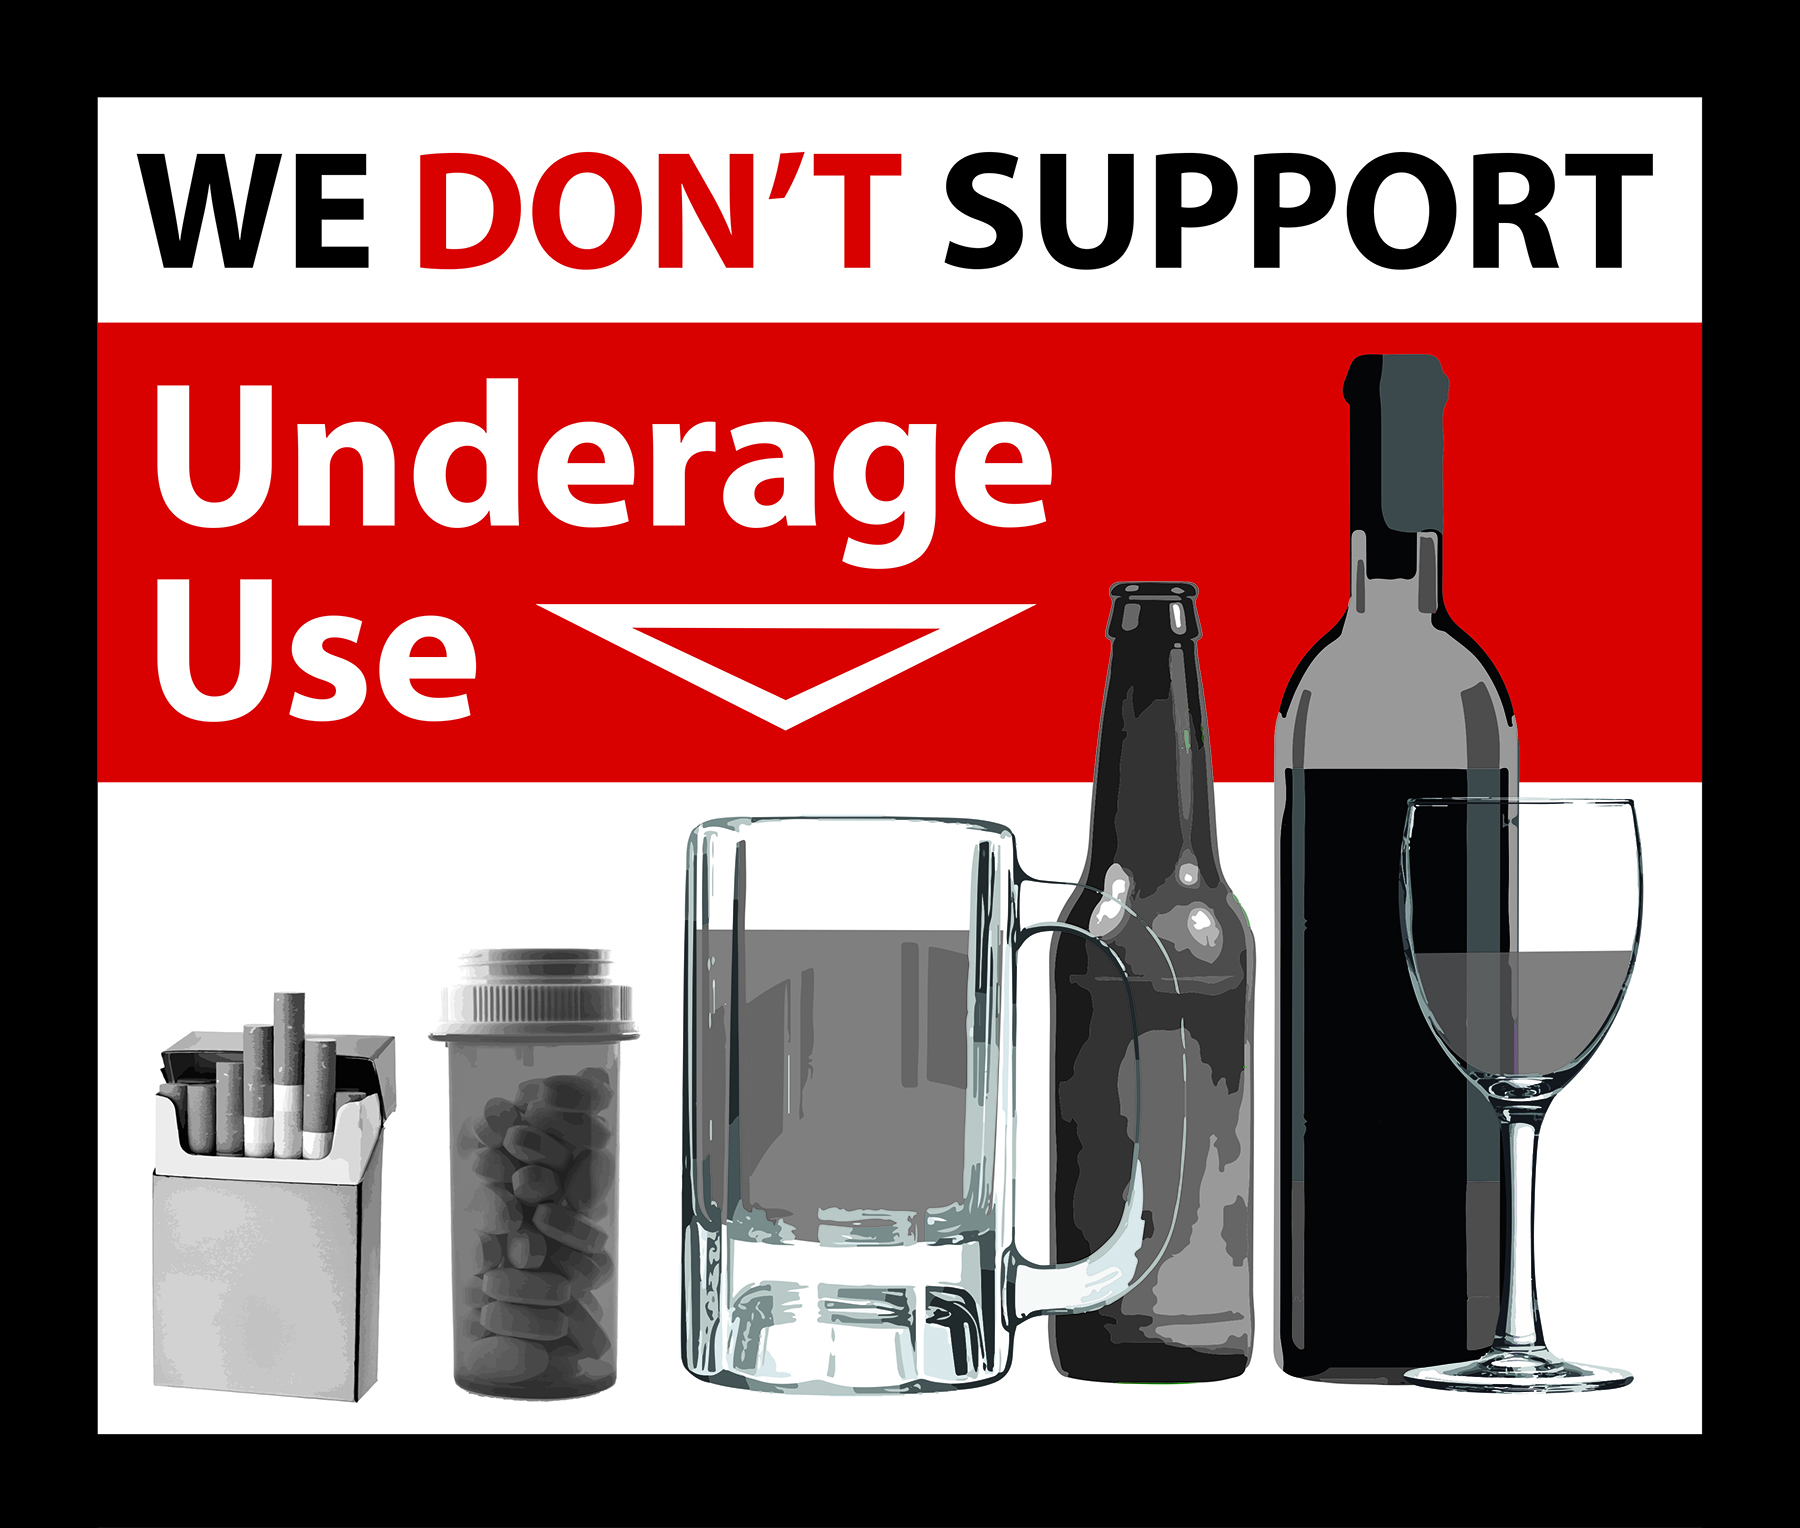 We Don't Support Underage Use Campaign